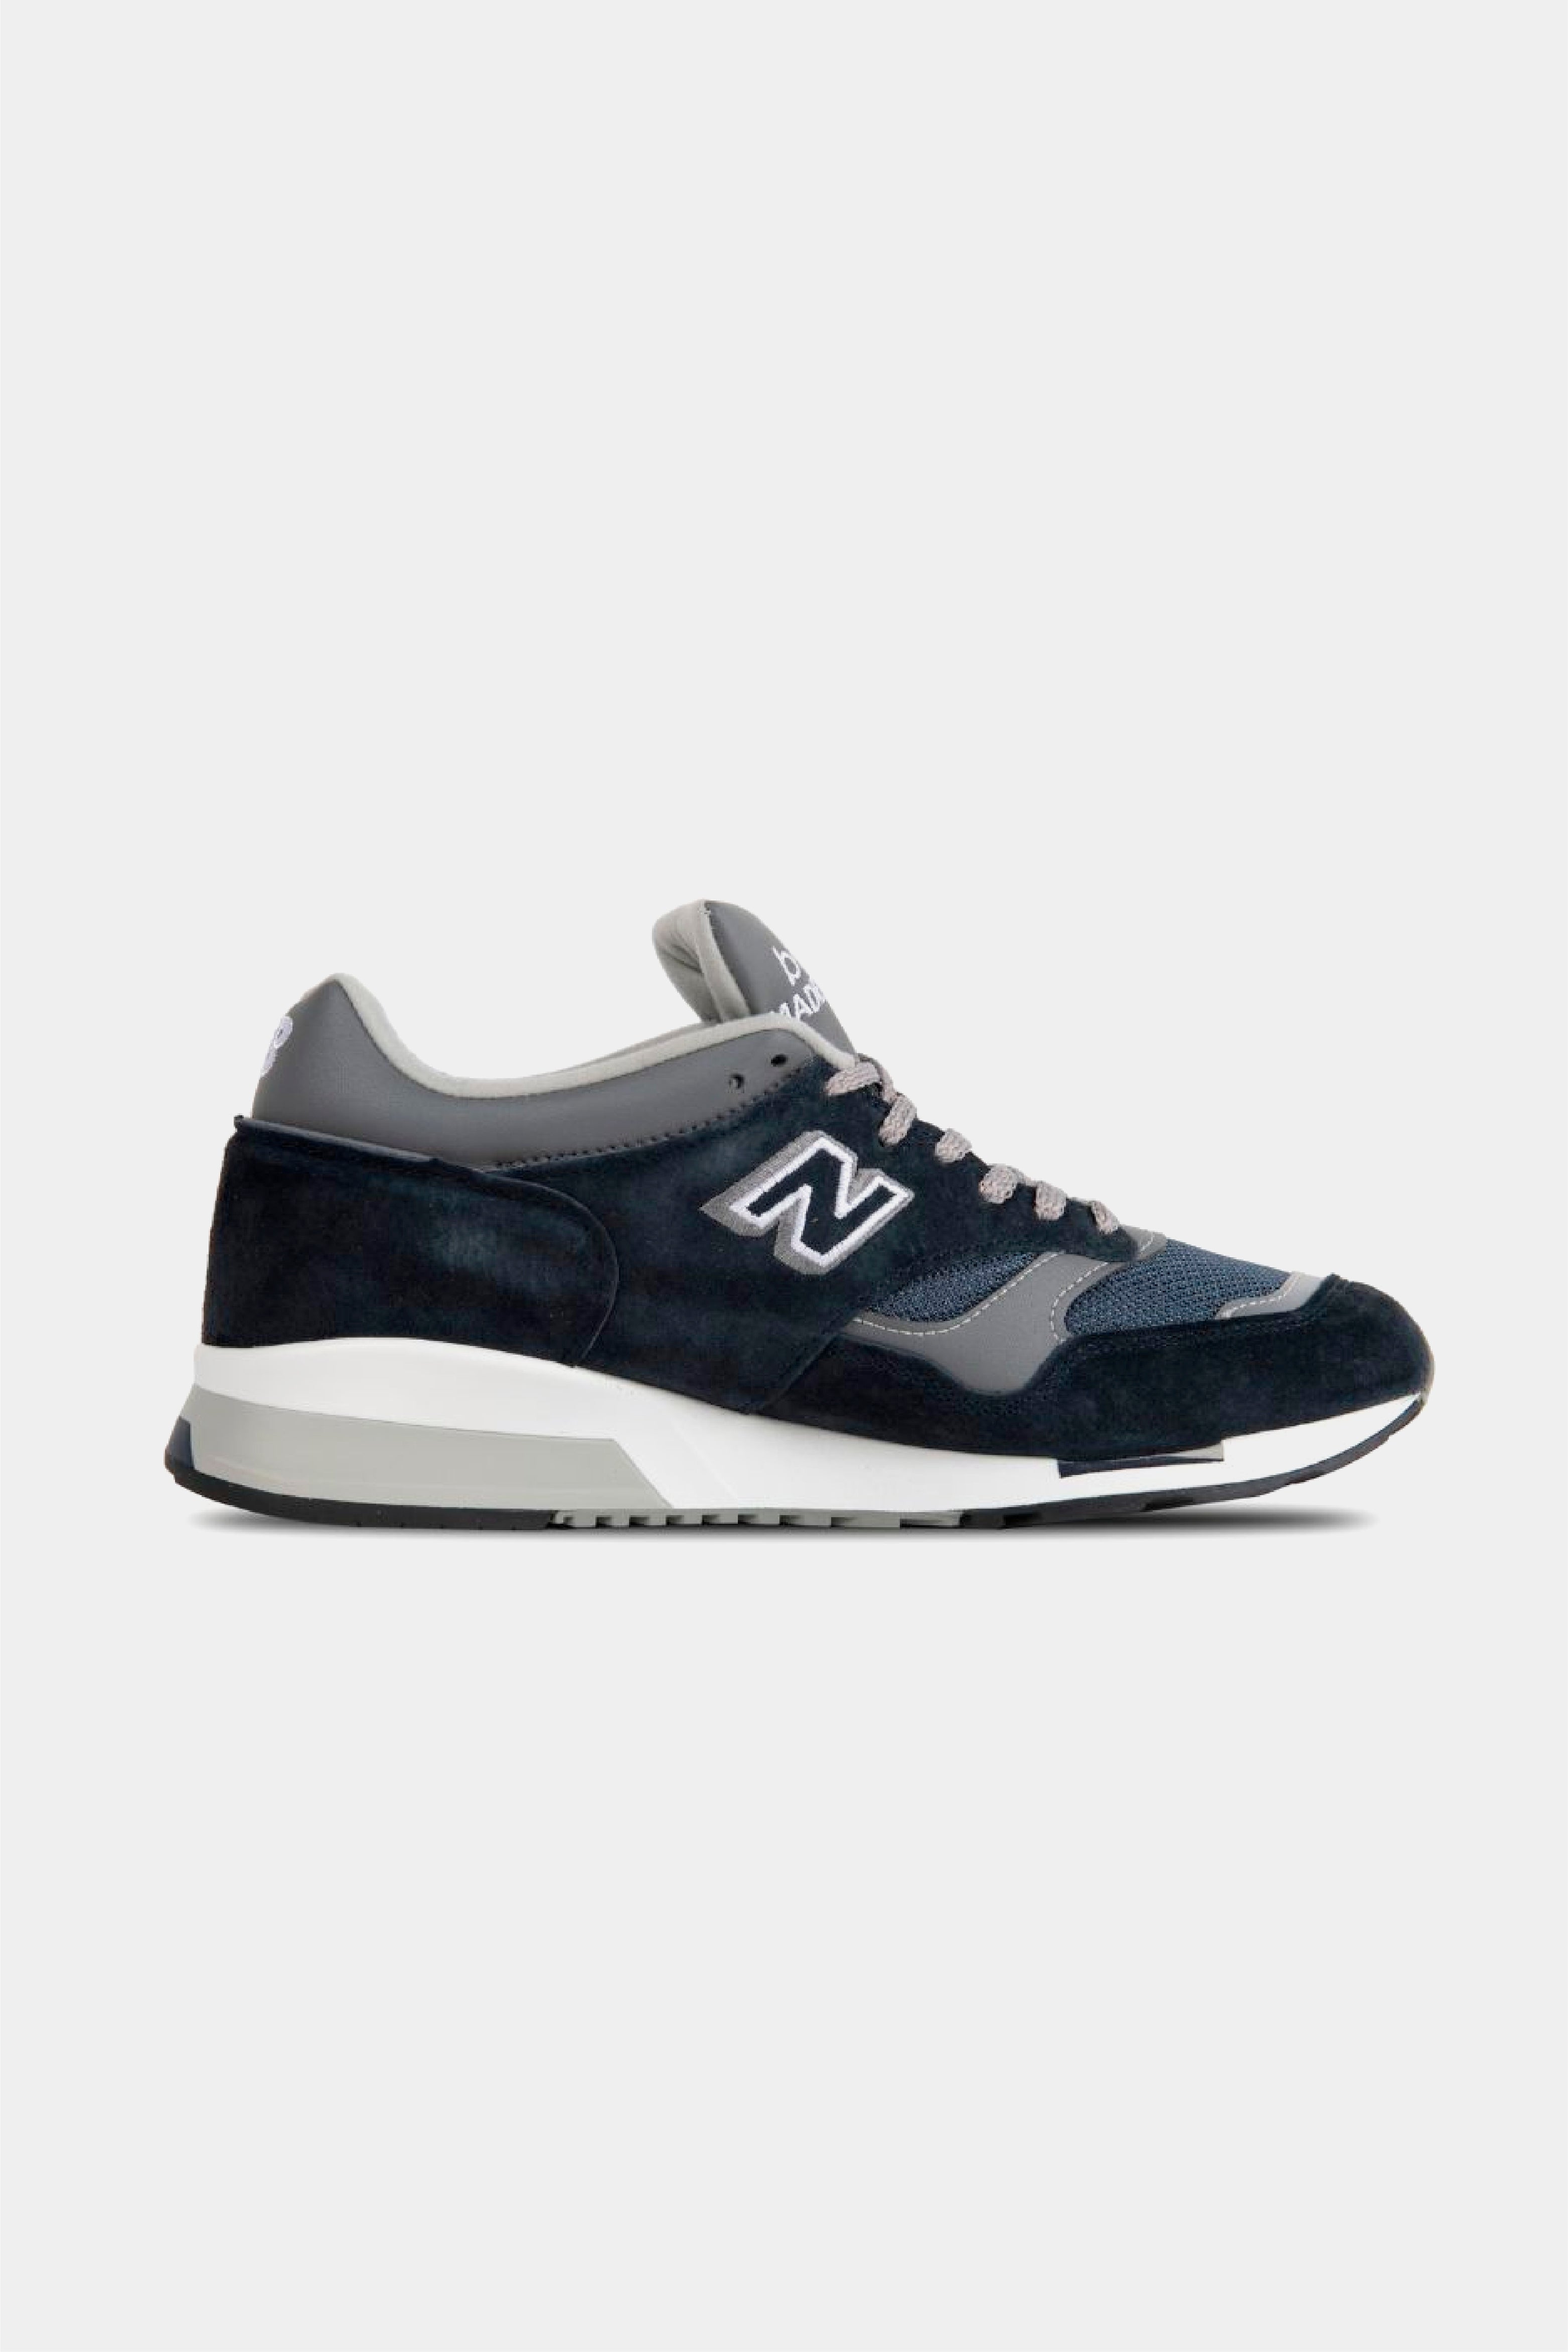 Selectshop FRAME - NEW BALANCE 1500 Made In England "Navy And Grey" Footwear Concept Store Dubai